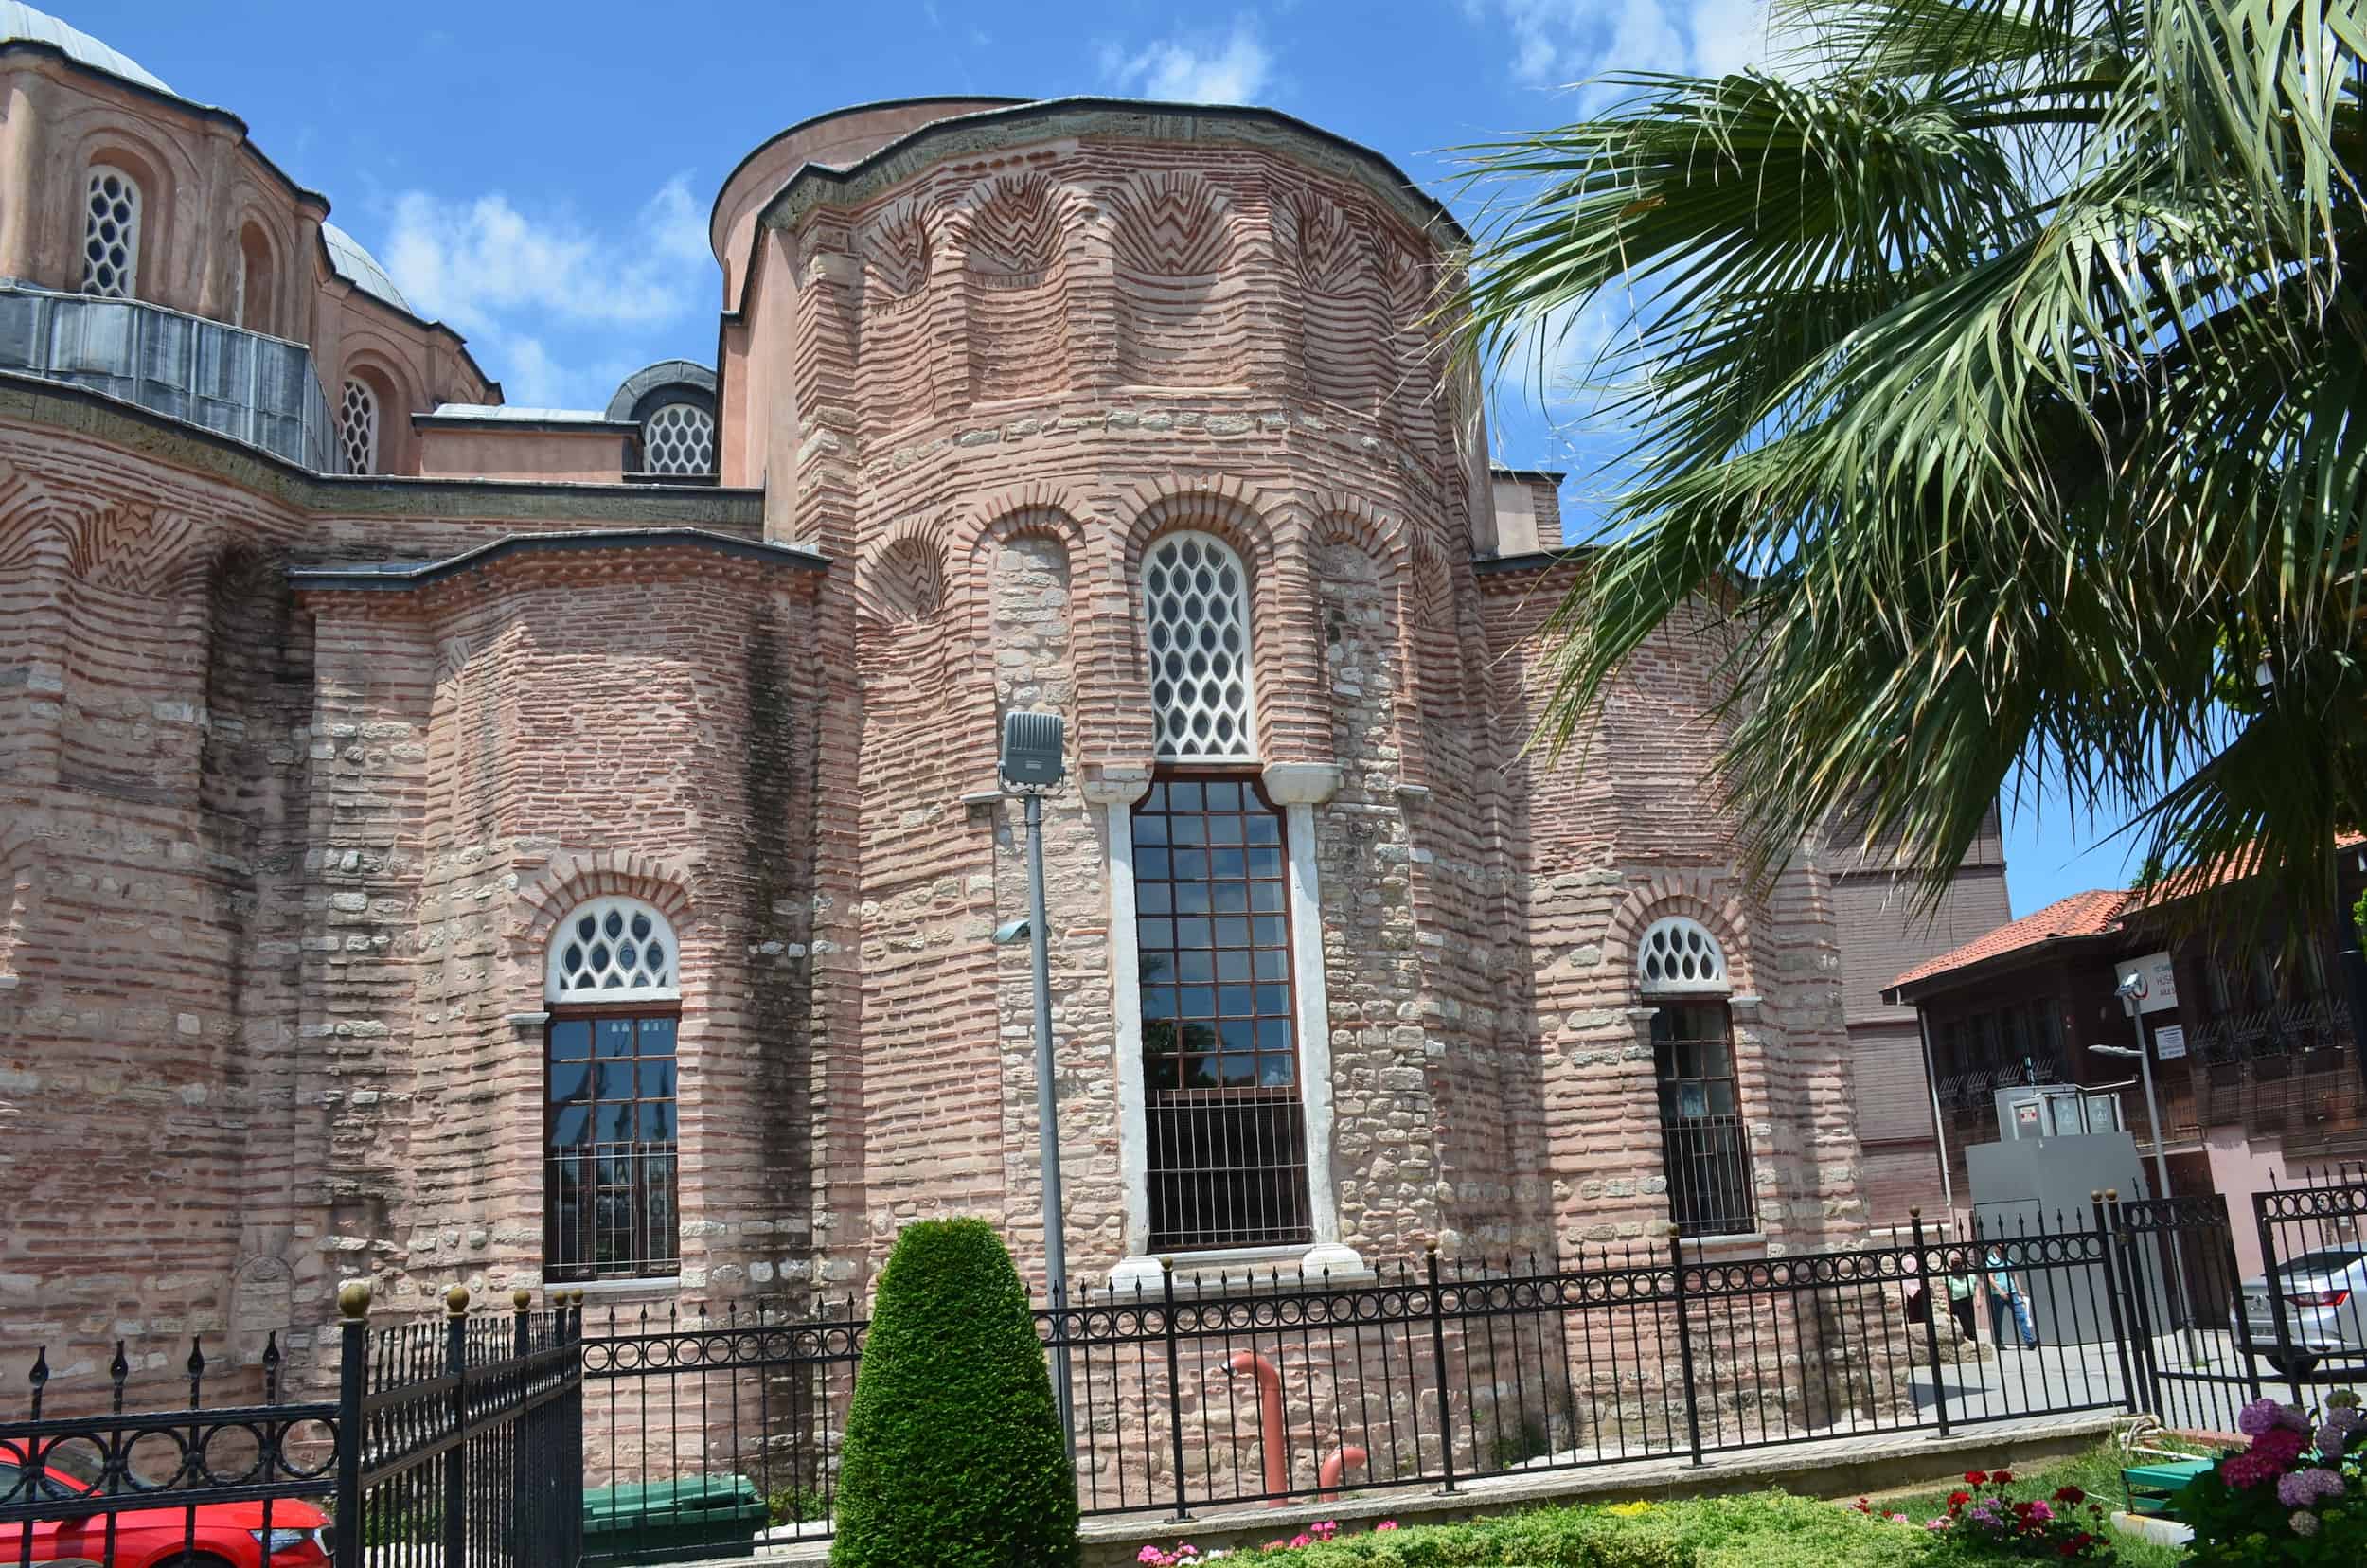 Apse of the north church of the Zeyrek Mosque in Zeyrek, Istanbul, Turkey